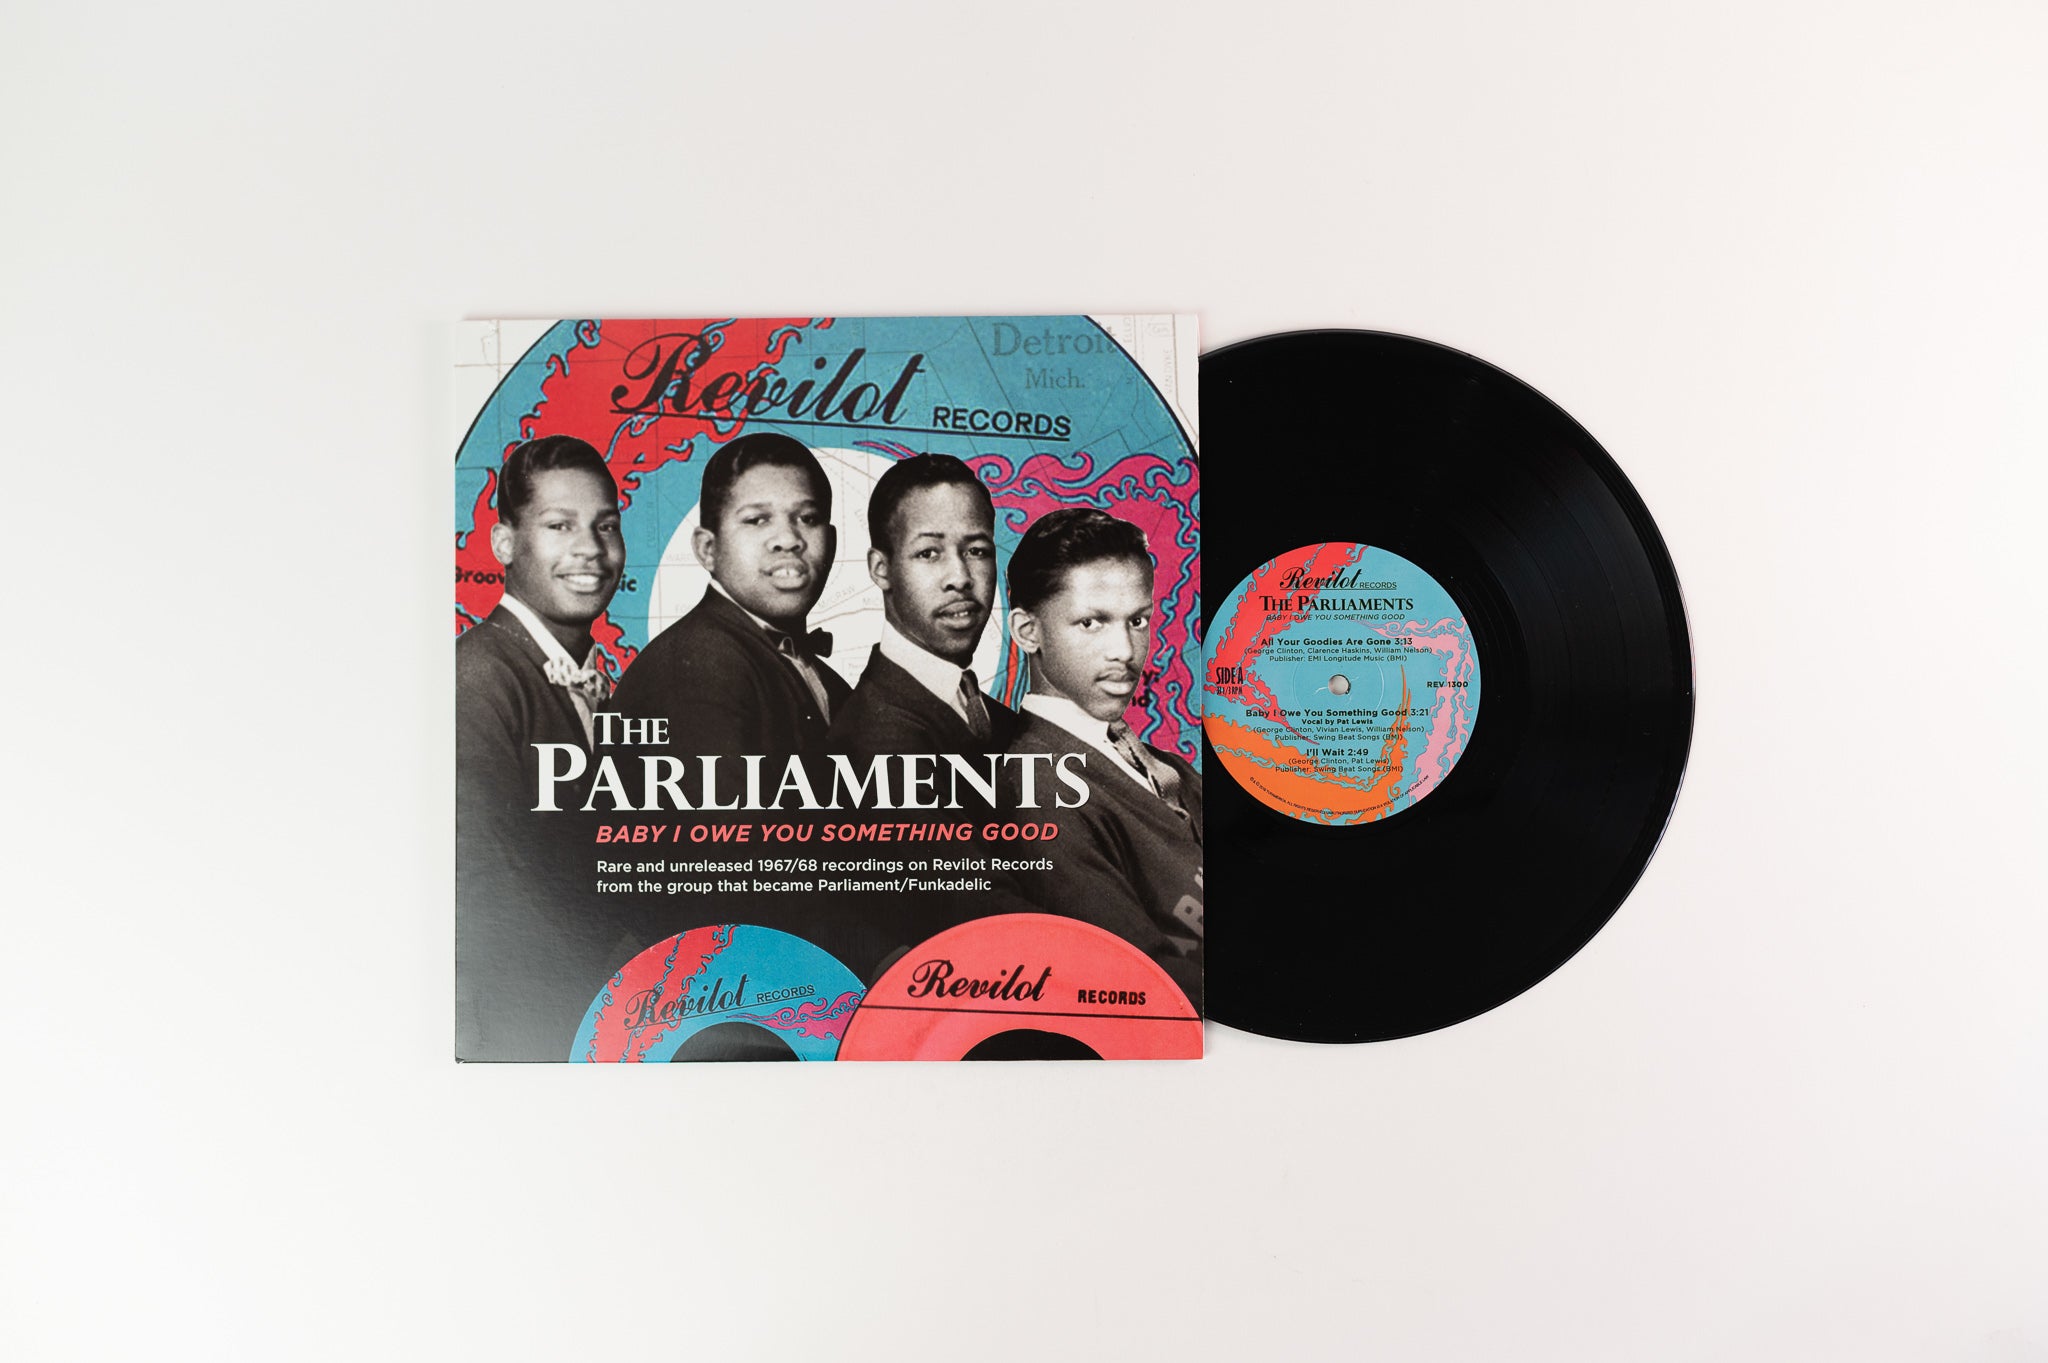 The Parliaments - Baby I Owe You Something Good on Revilot 10" LP